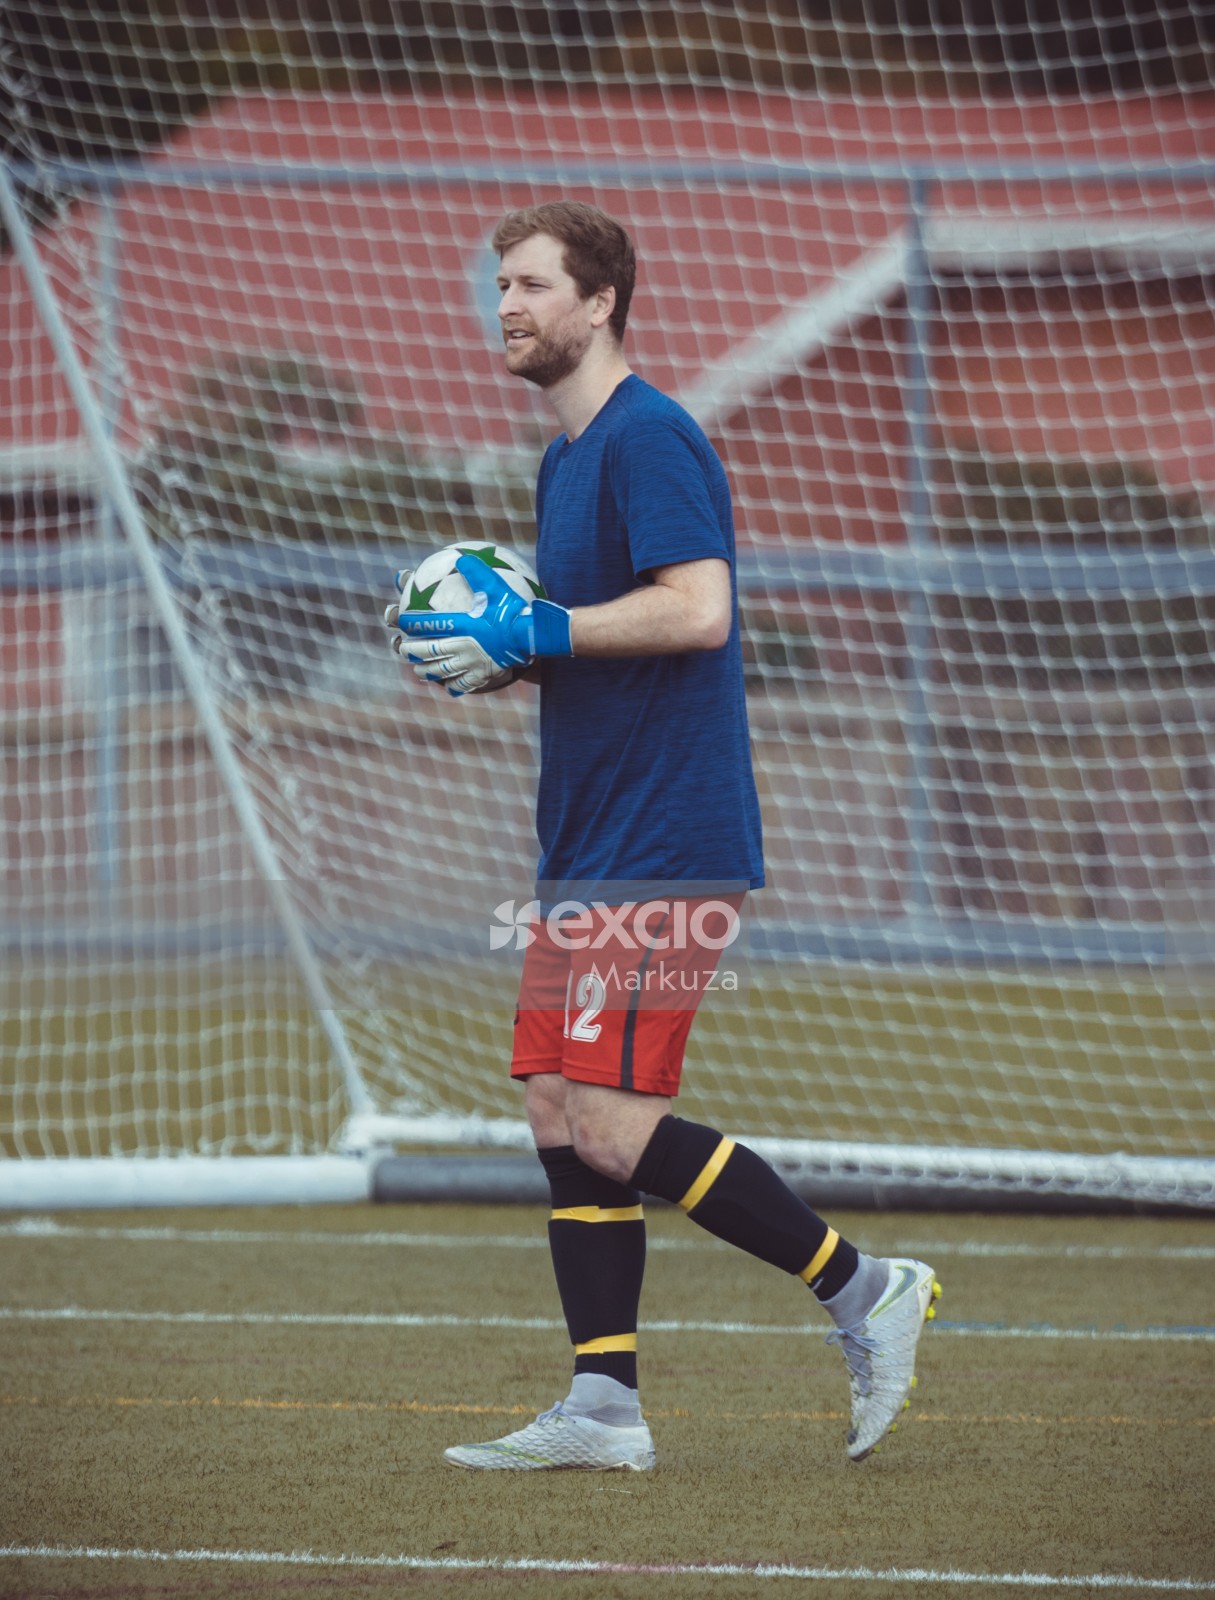 Goalkeeper holding a ball in his hands - Sports Zone sunday league